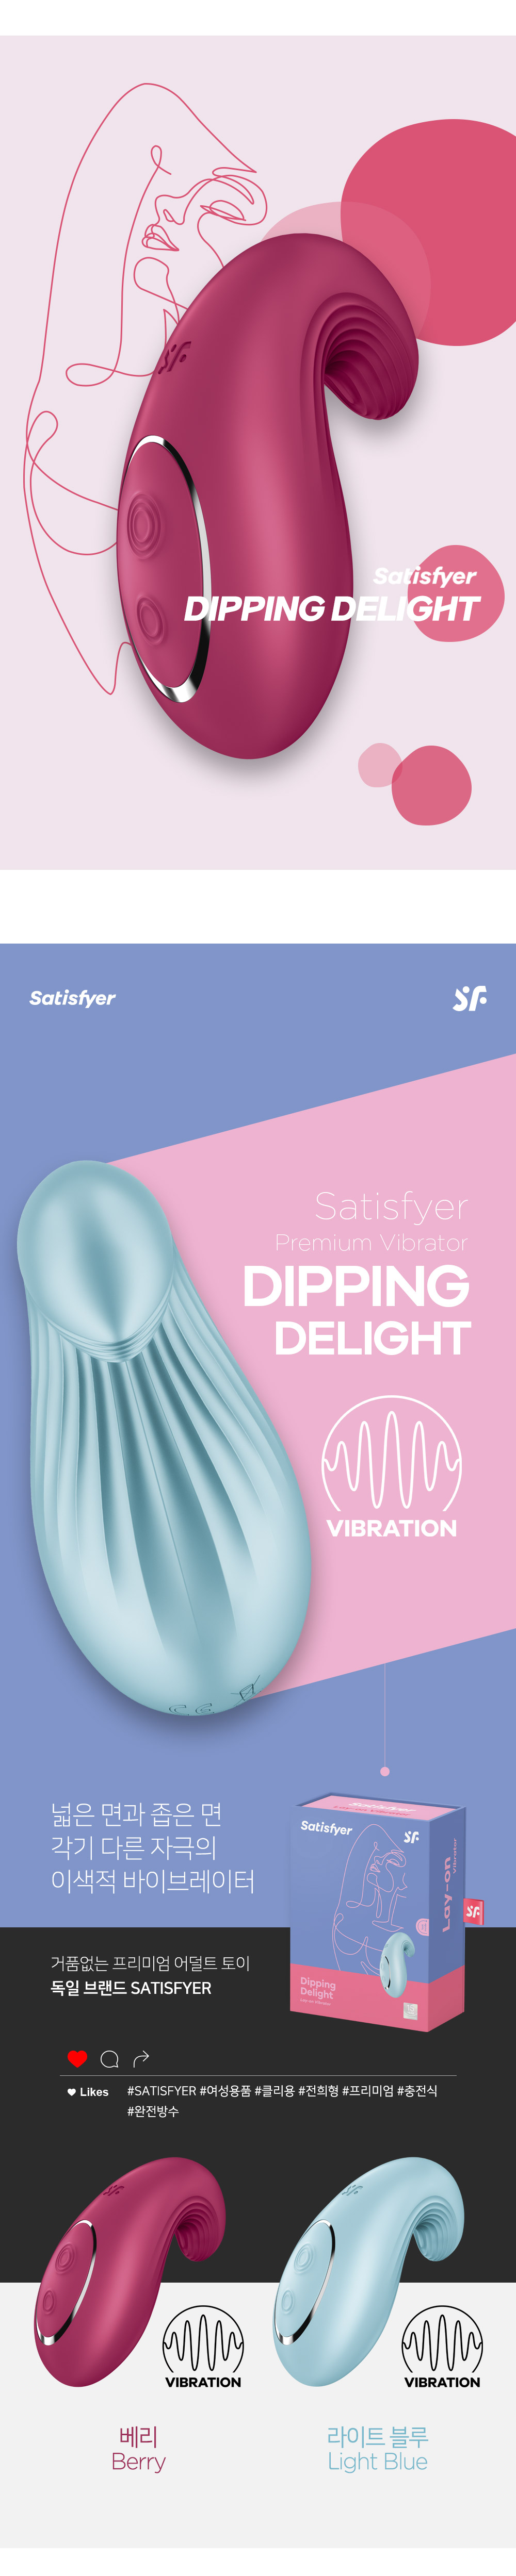 SATISFYER DIPPING DELIGHT (2 COLOR)